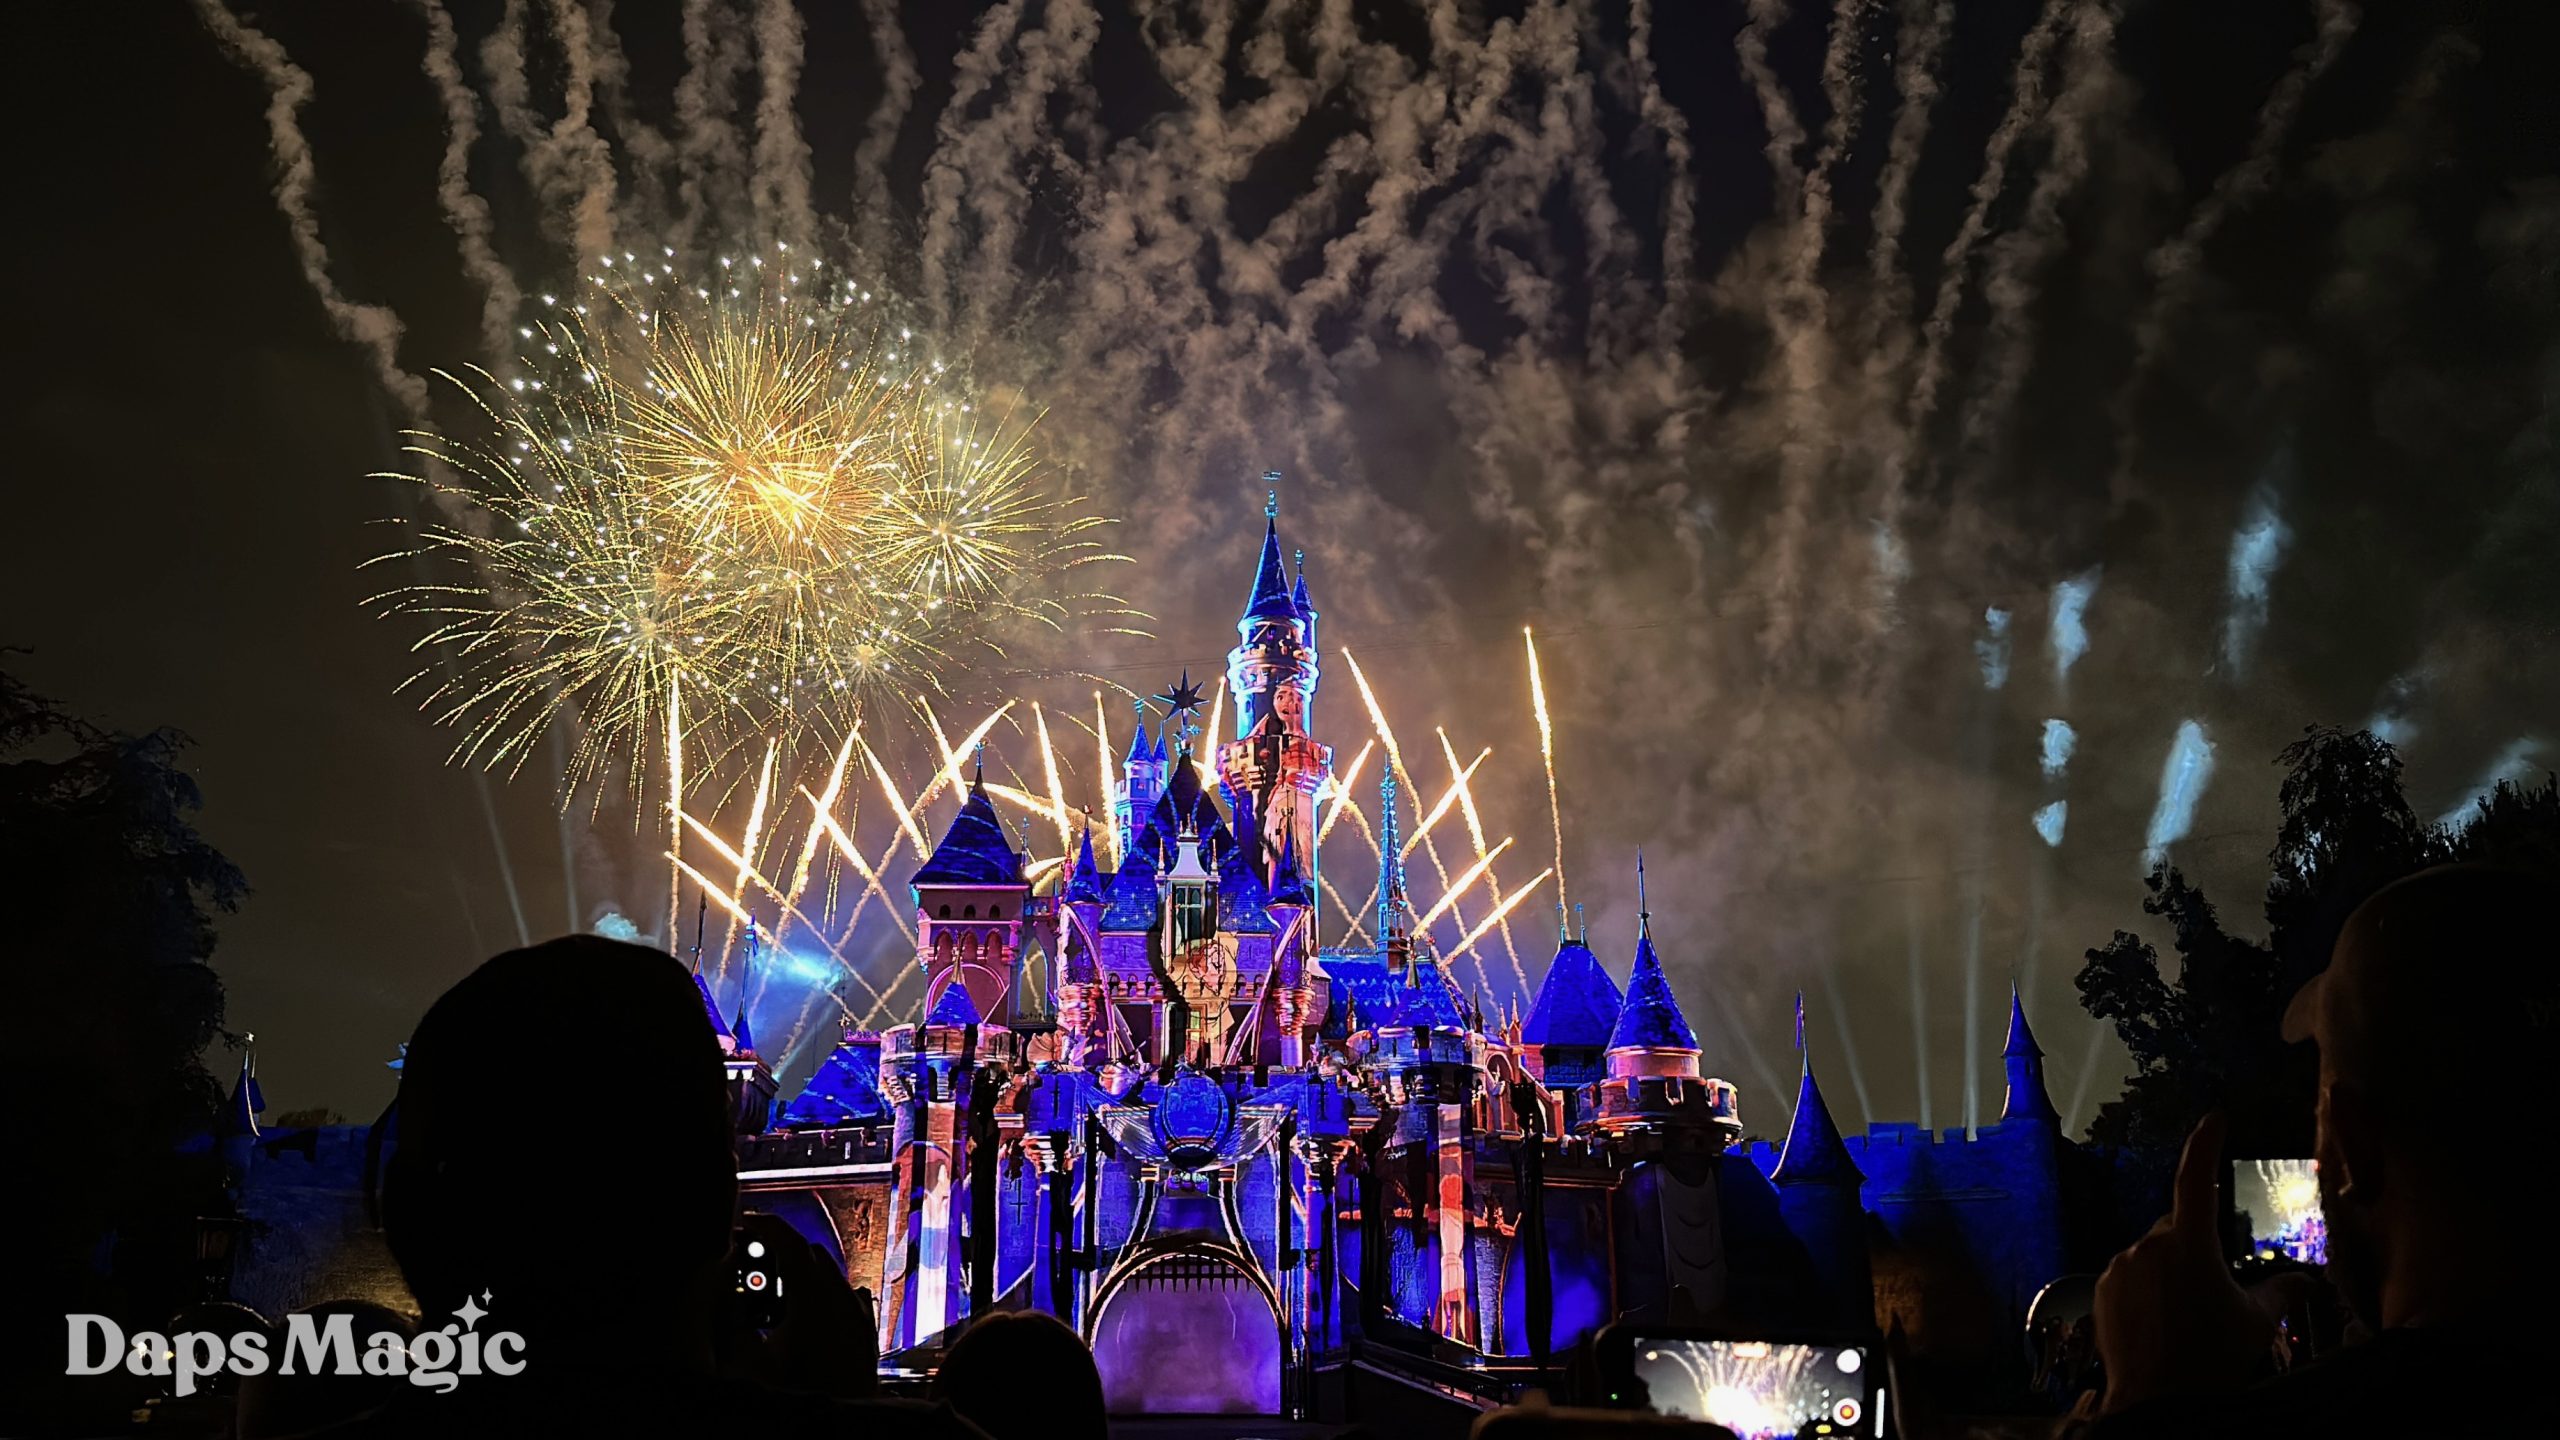 Wondrous Journeys Lights Up the Skies Over Disneyland One Last Time as Summer Draws to a Close